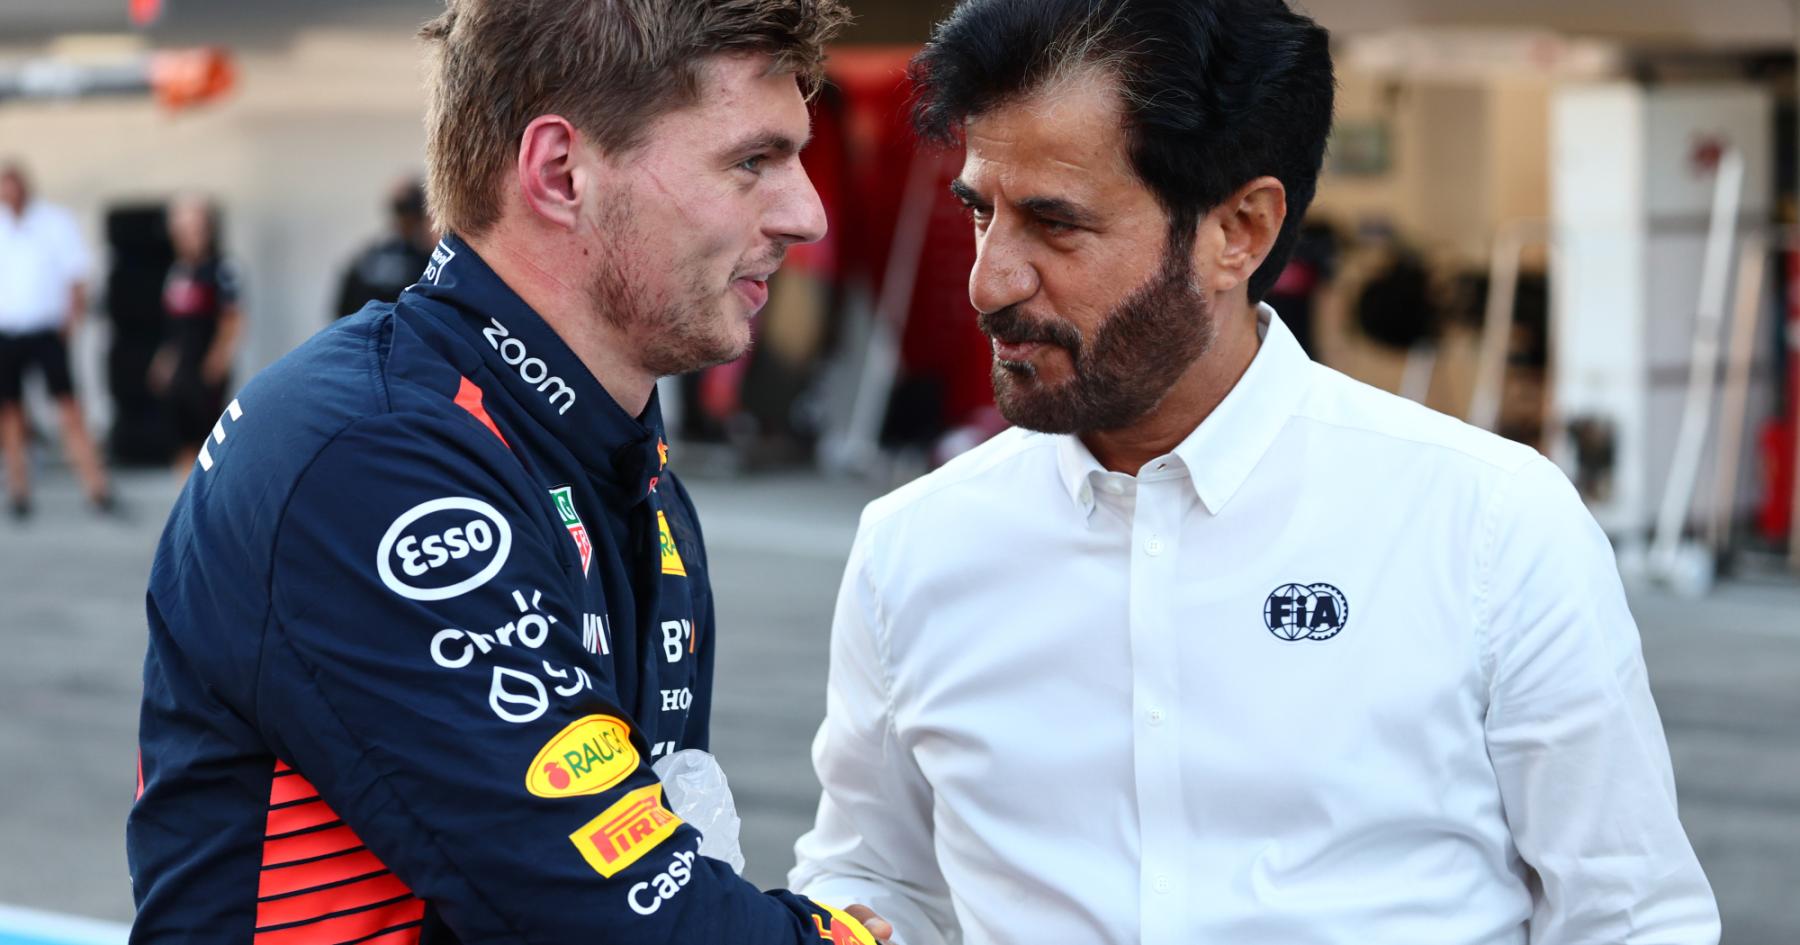 FIA President hit with new allegations as Verstappen escape clause emerges – RacingNews365 Review